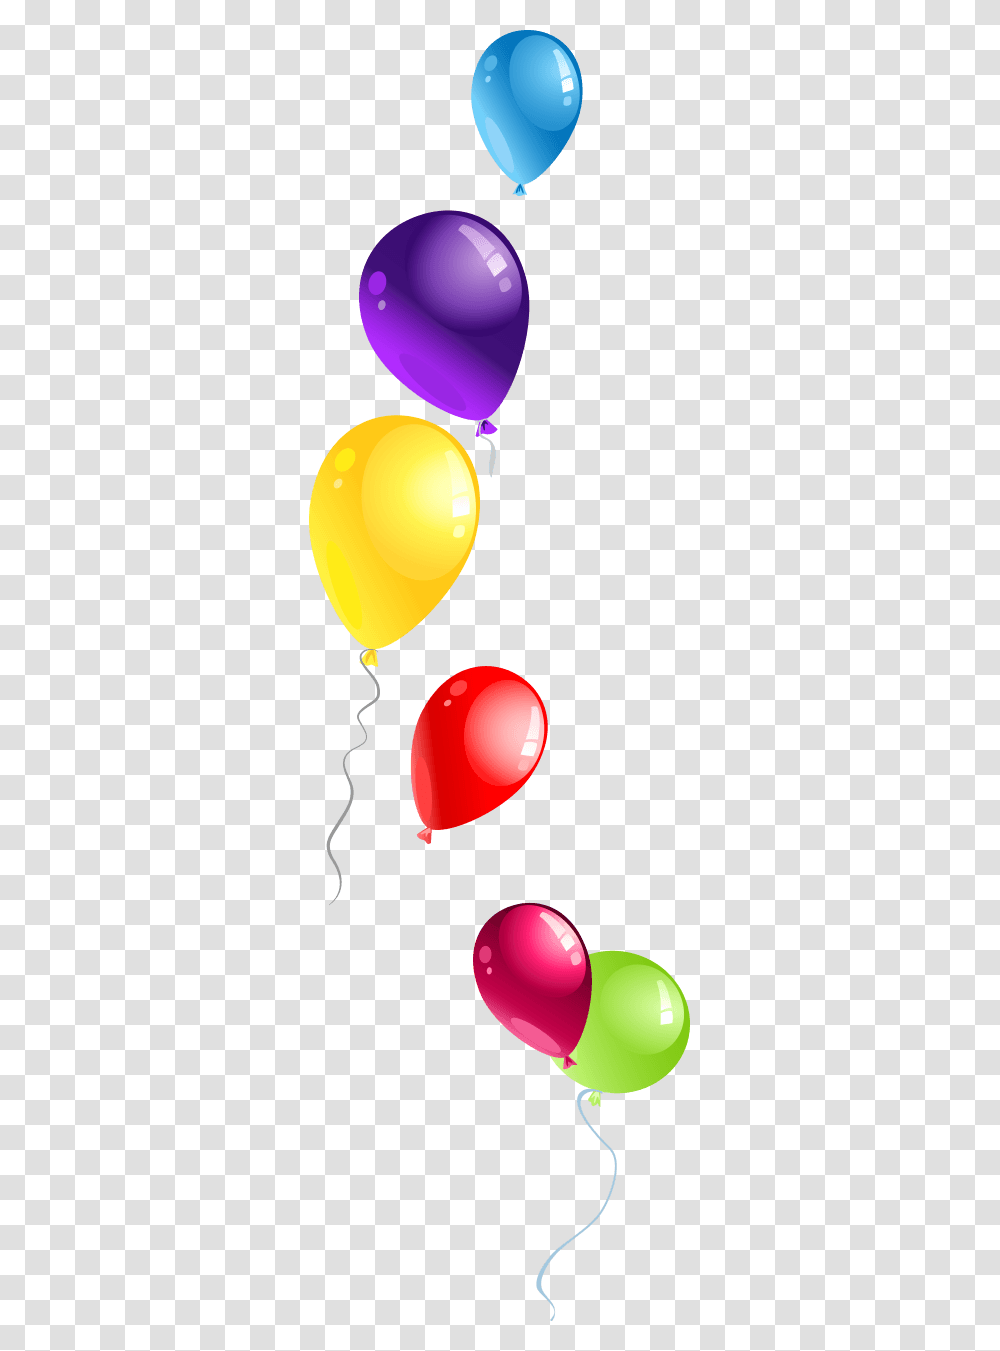 Hd Balloon Arch Left Balloons Left Side Transparent Png